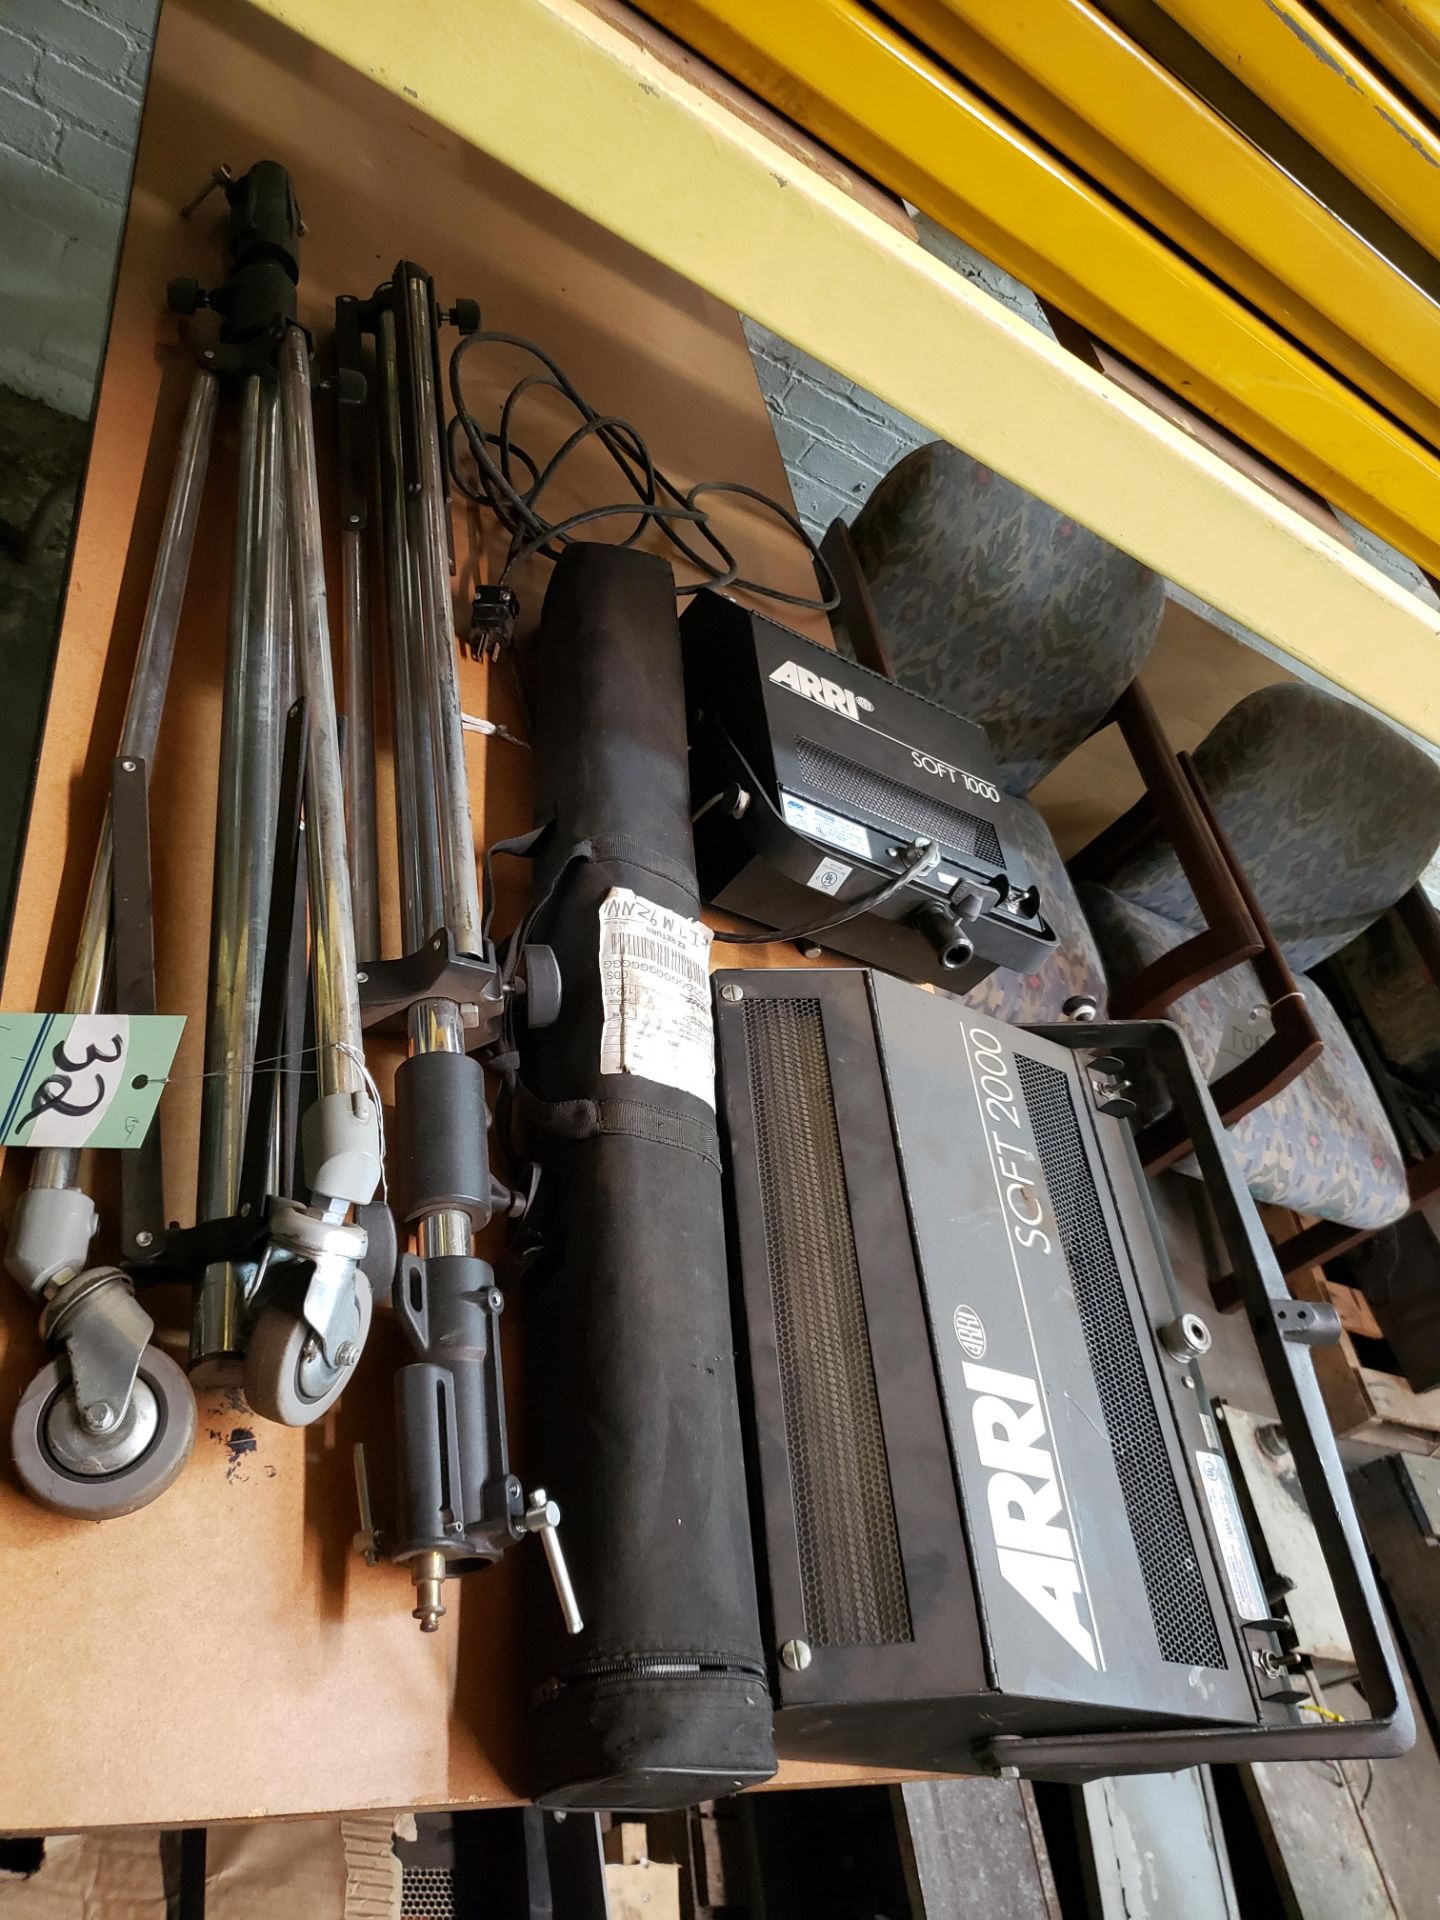 LOT OF STUDIO LIGHTING AND TRIPODS - Image 8 of 8